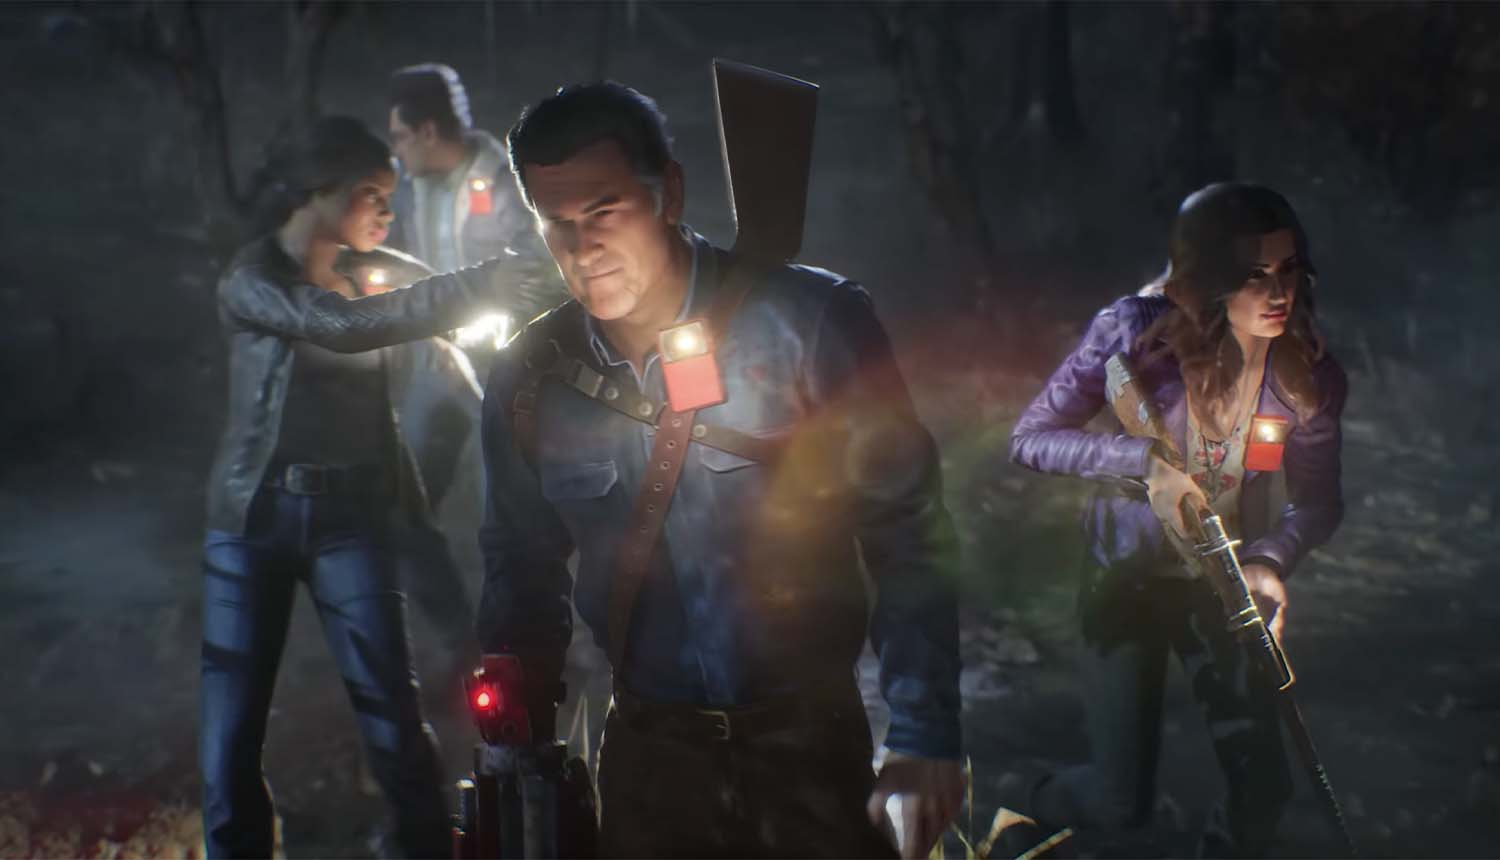 Evil Dead: The Game pits 40 players against each other in its new